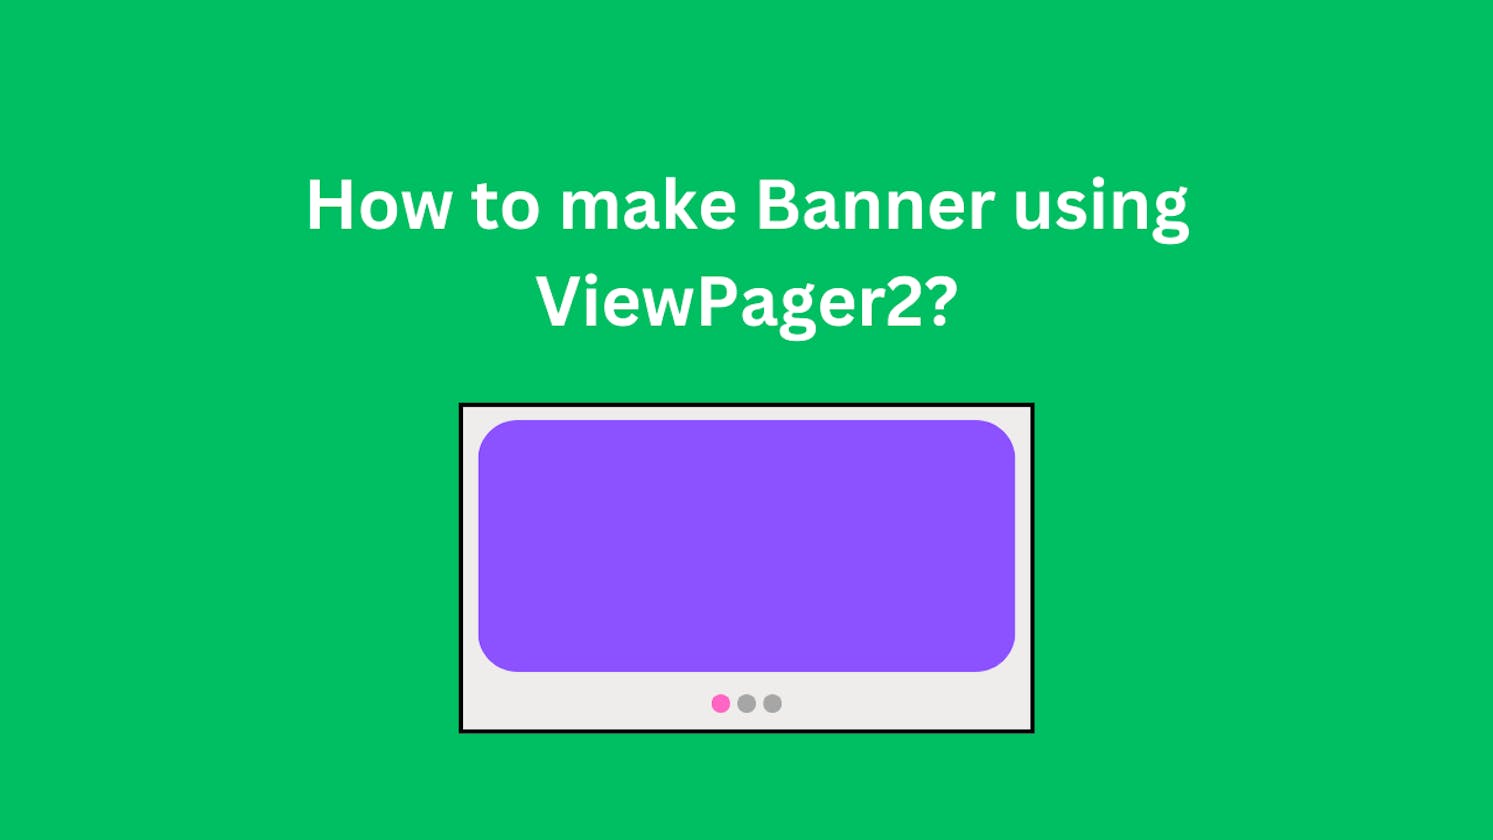 How to make Banners in Android App?